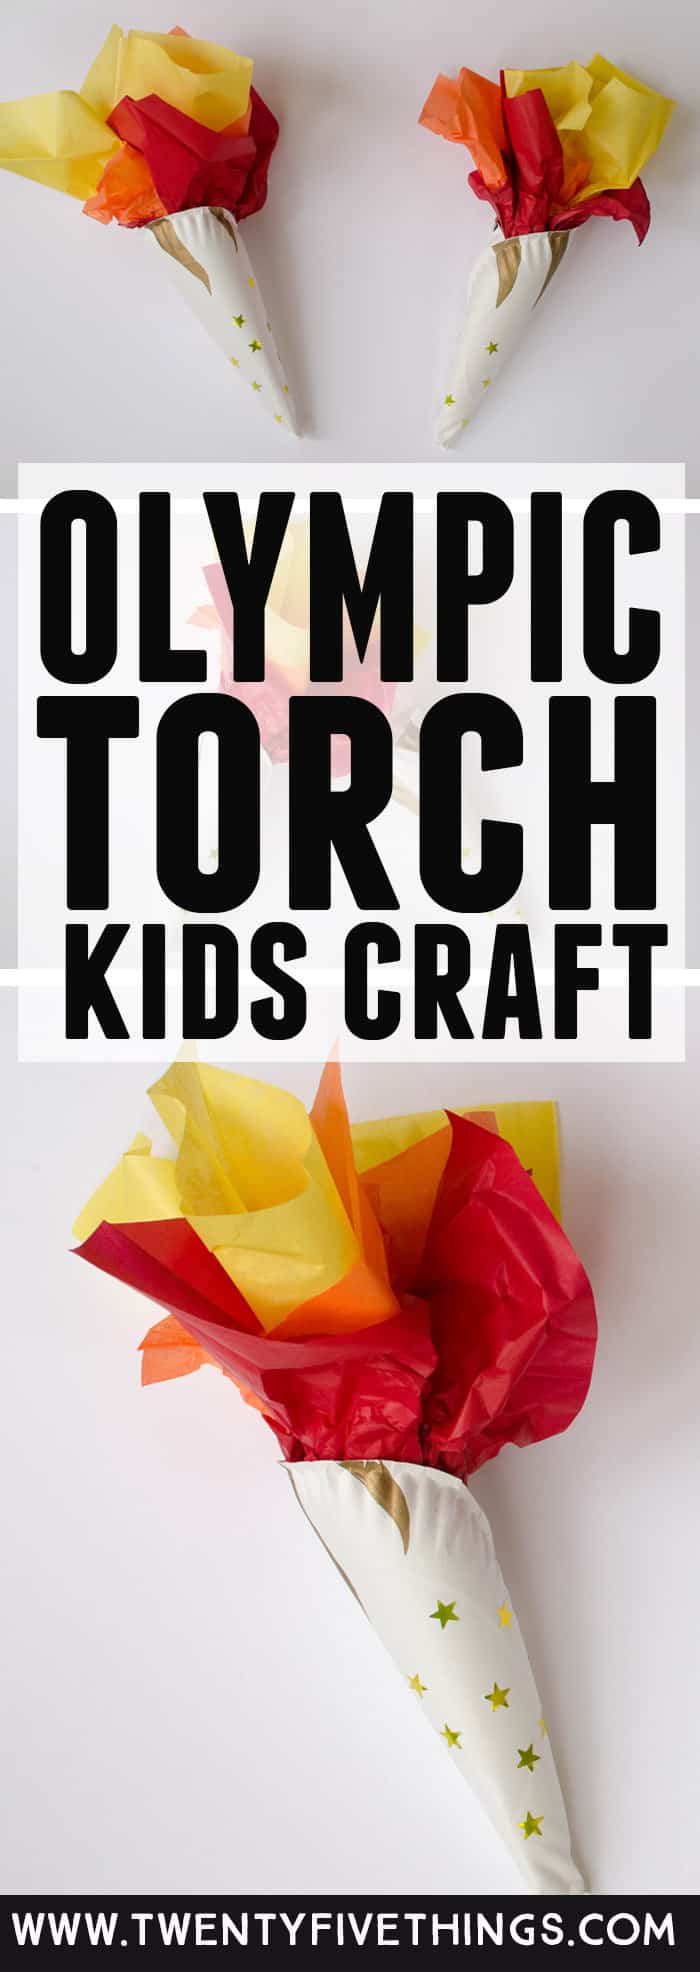 This Olympic torch craft is a fun way to celebrate the Olympics with kids. Slide a battery-powered tea light inside to make the torch glow. #WinterOlympics #OlympicGames #KidsCrafts